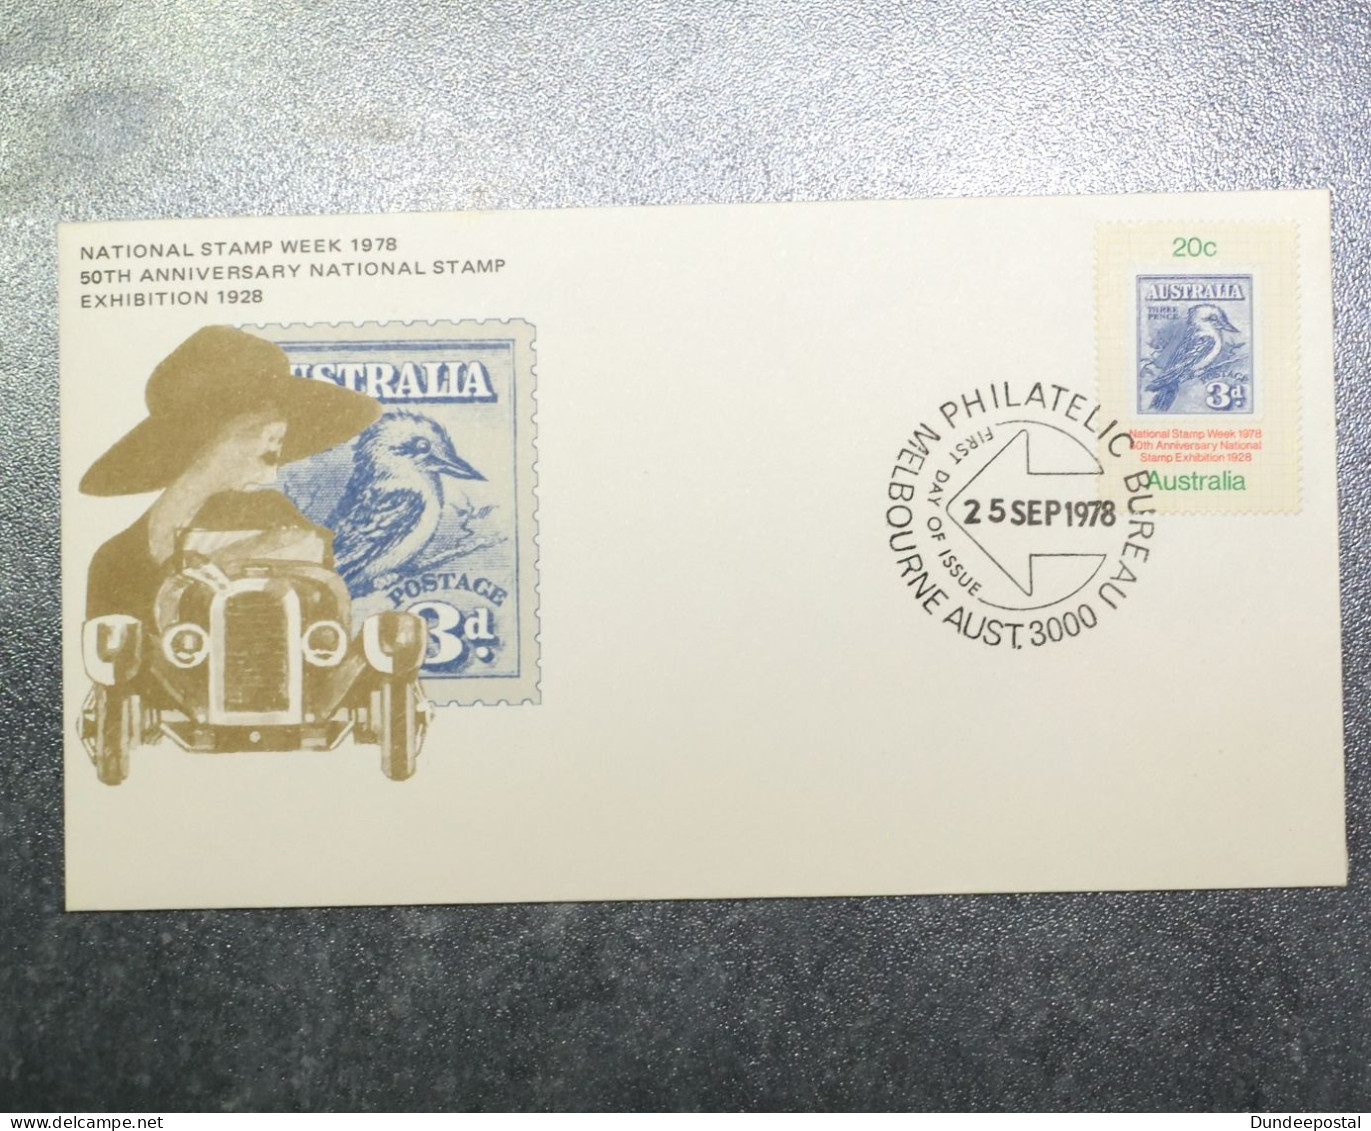 AUSTRALIA  First Day Cover  Stamp Week Single 1978  ~~L@@K~~ - Lettres & Documents